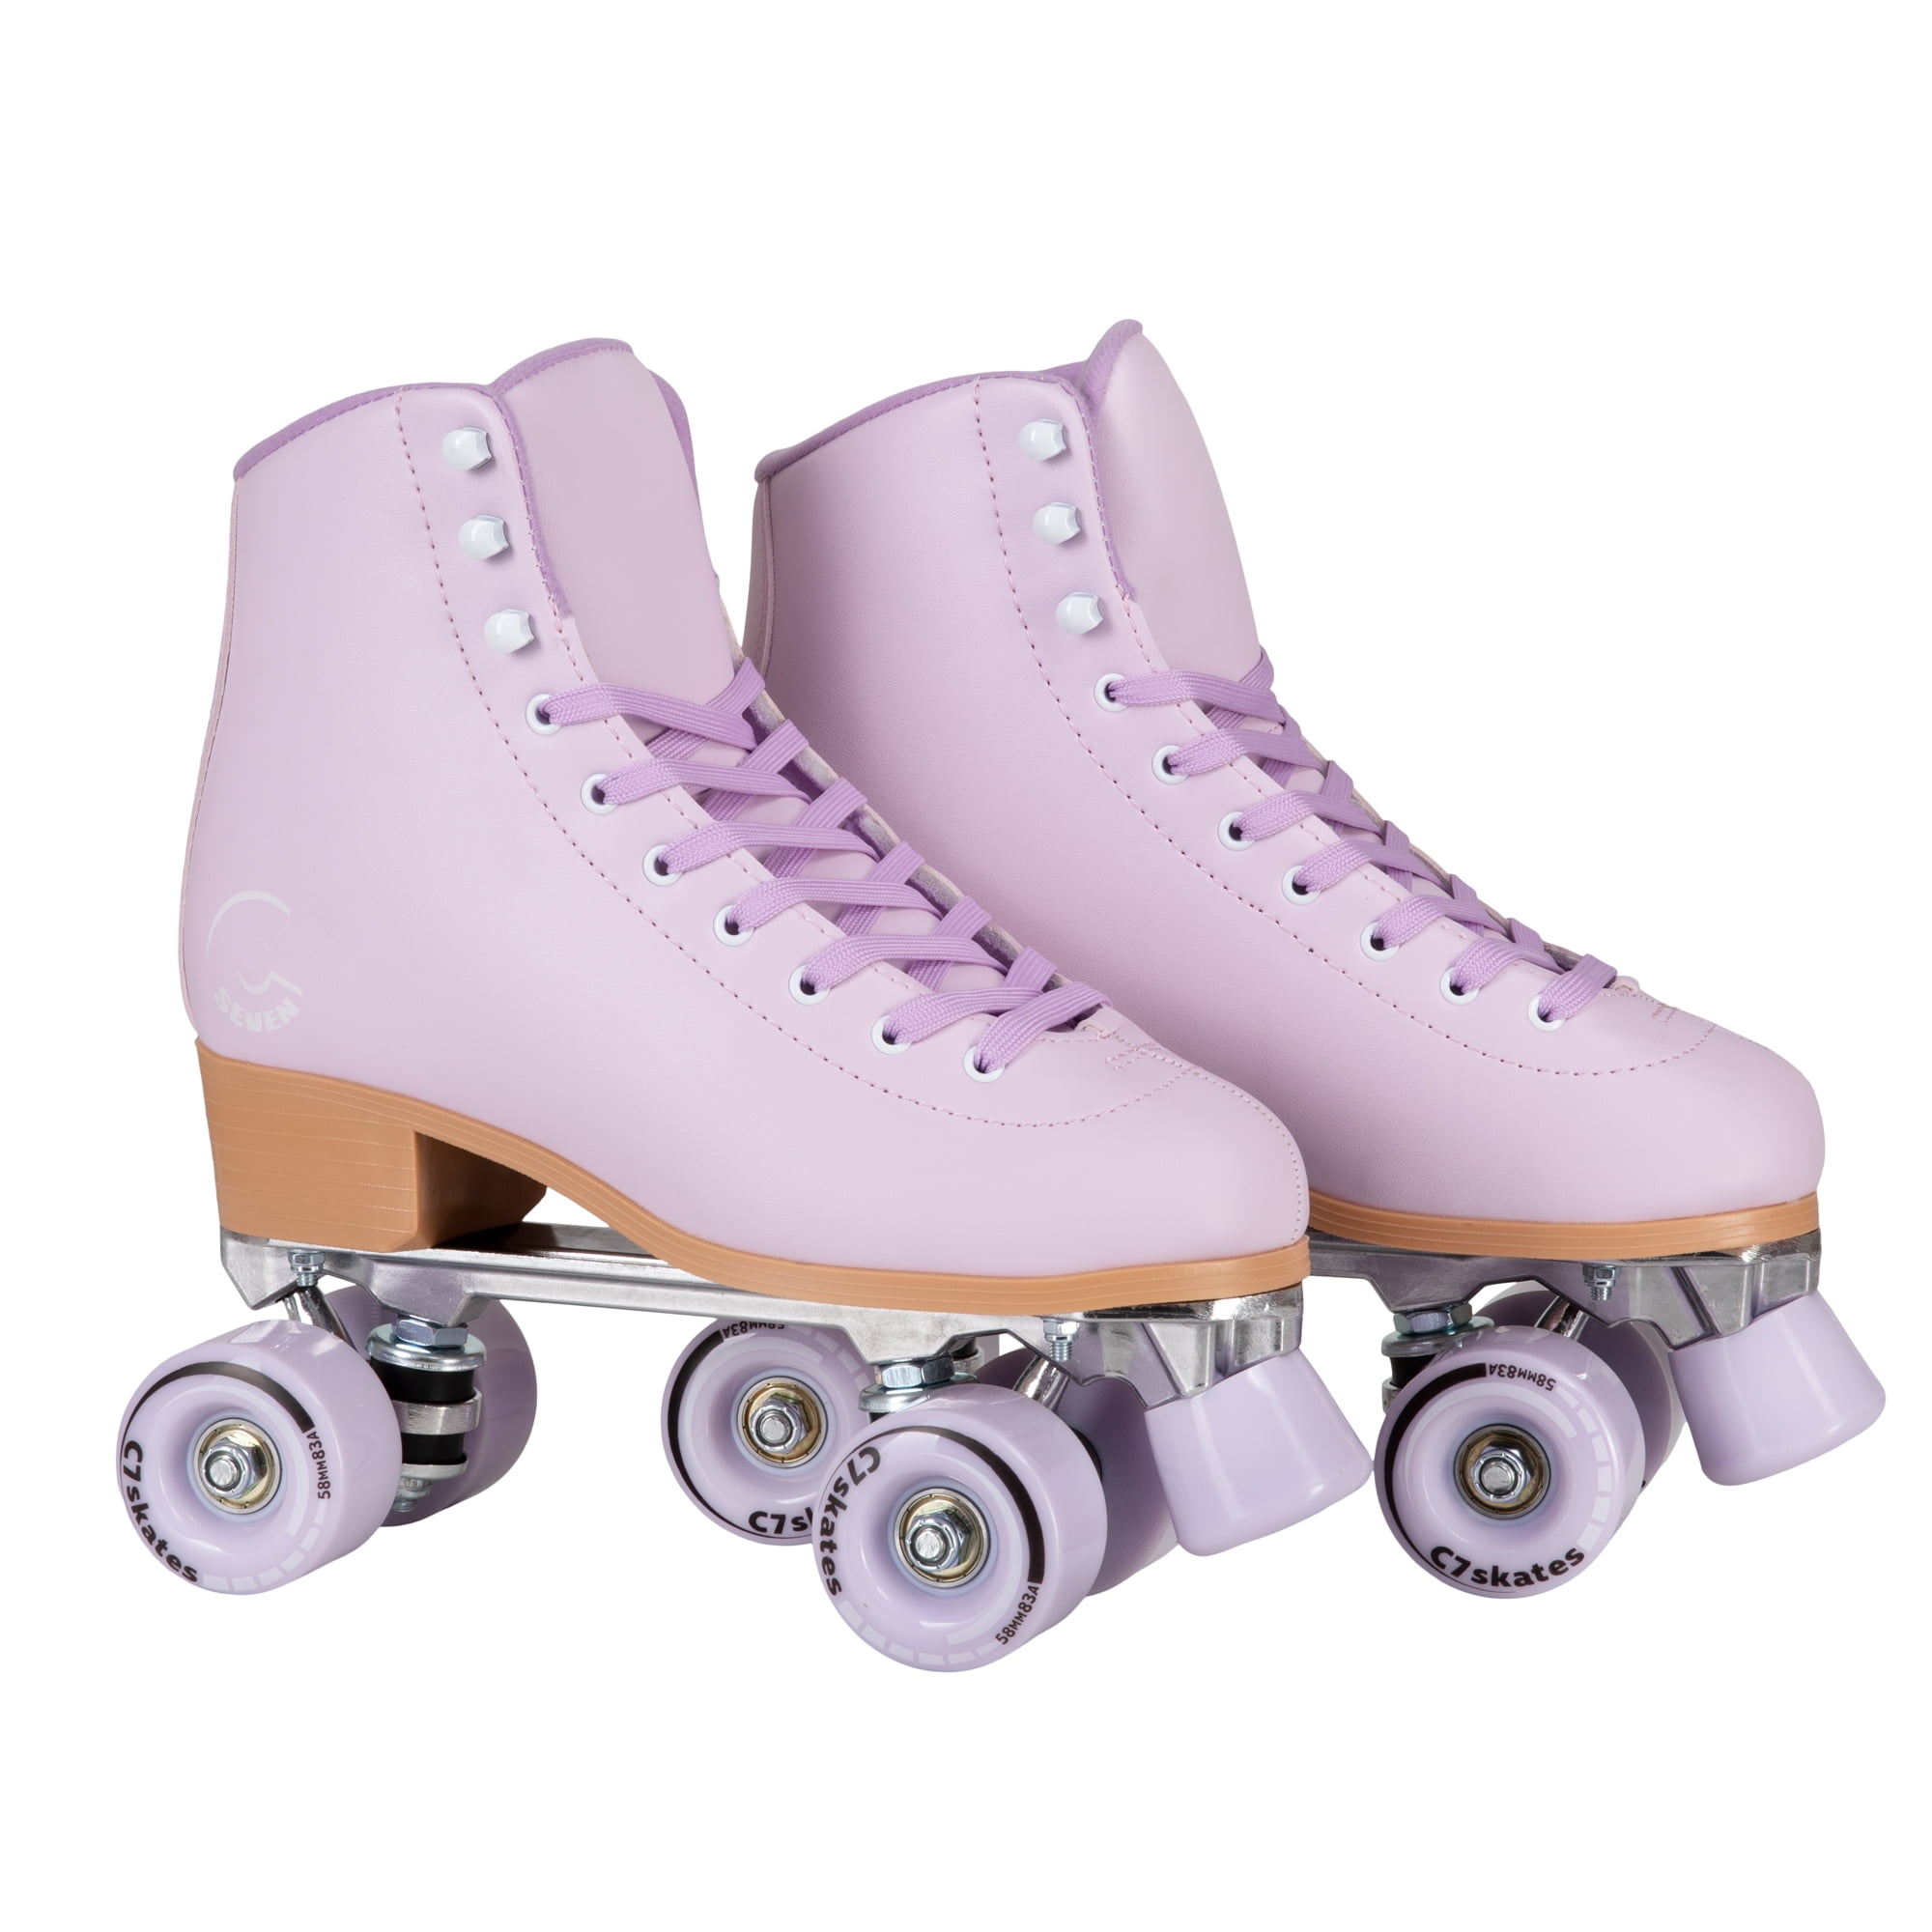 Details about   WOMEN GIRLS YOUTH ROLLER SKATES WHITE COLOR 